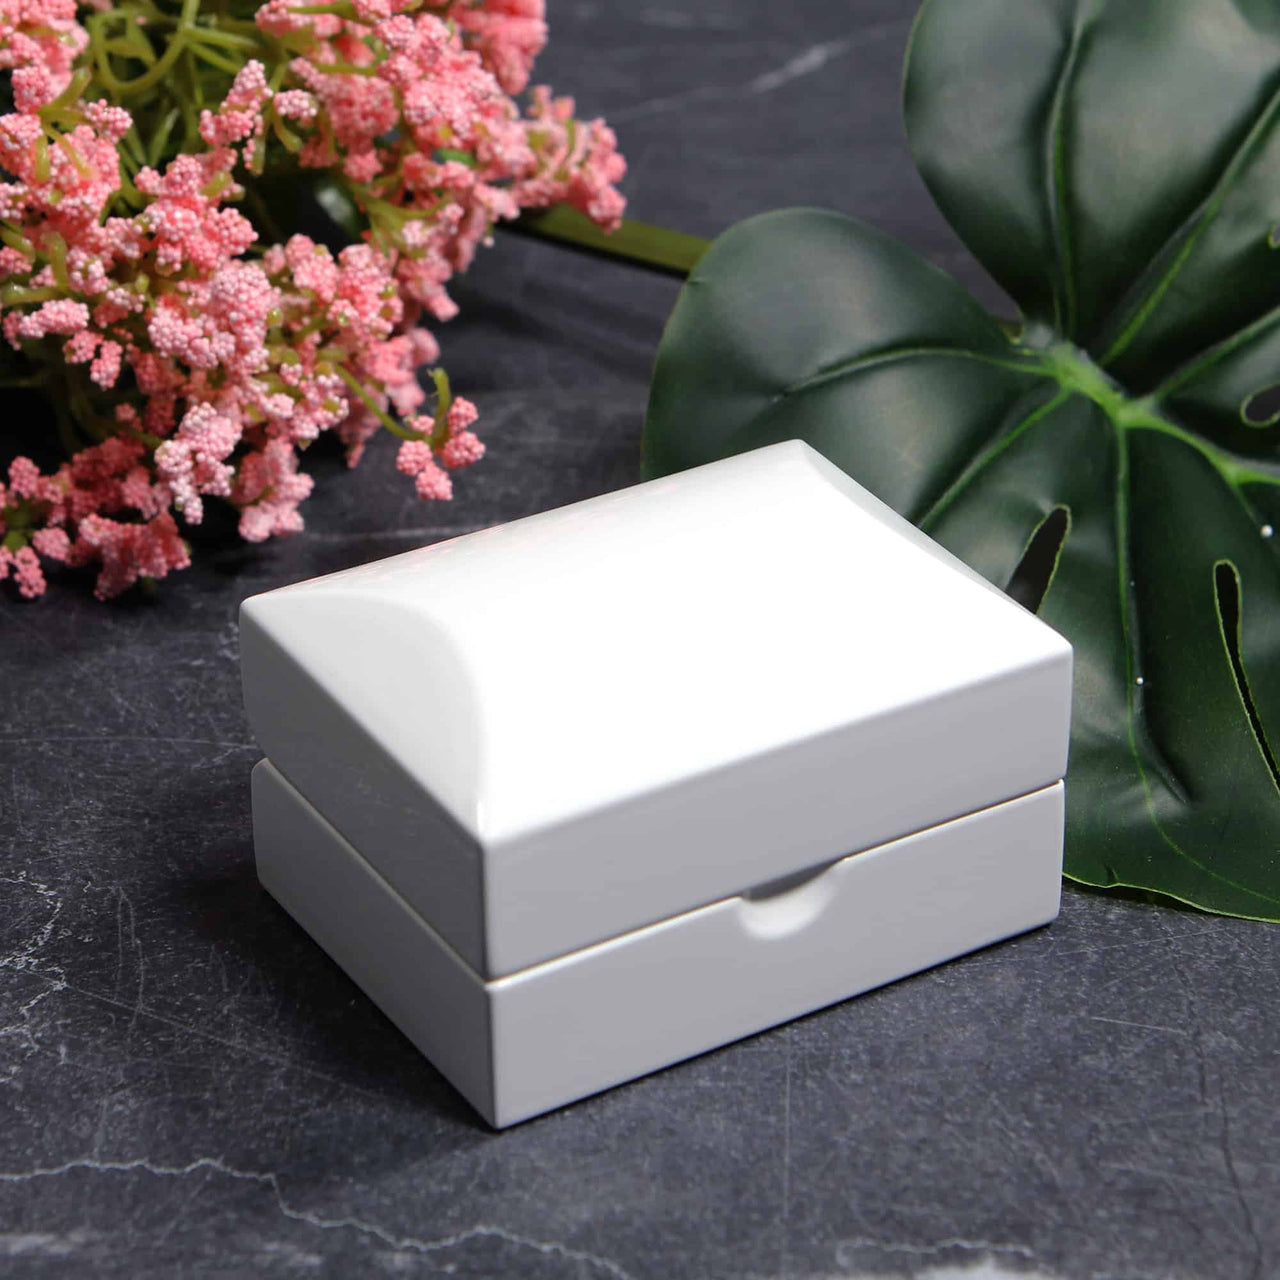 https://cdn.shopify.com/s/files/1/0636/0750/5142/products/gloss-white-modern-ring-box-double-ring-lifestyle1.jpg?v=1648835386&width=1280